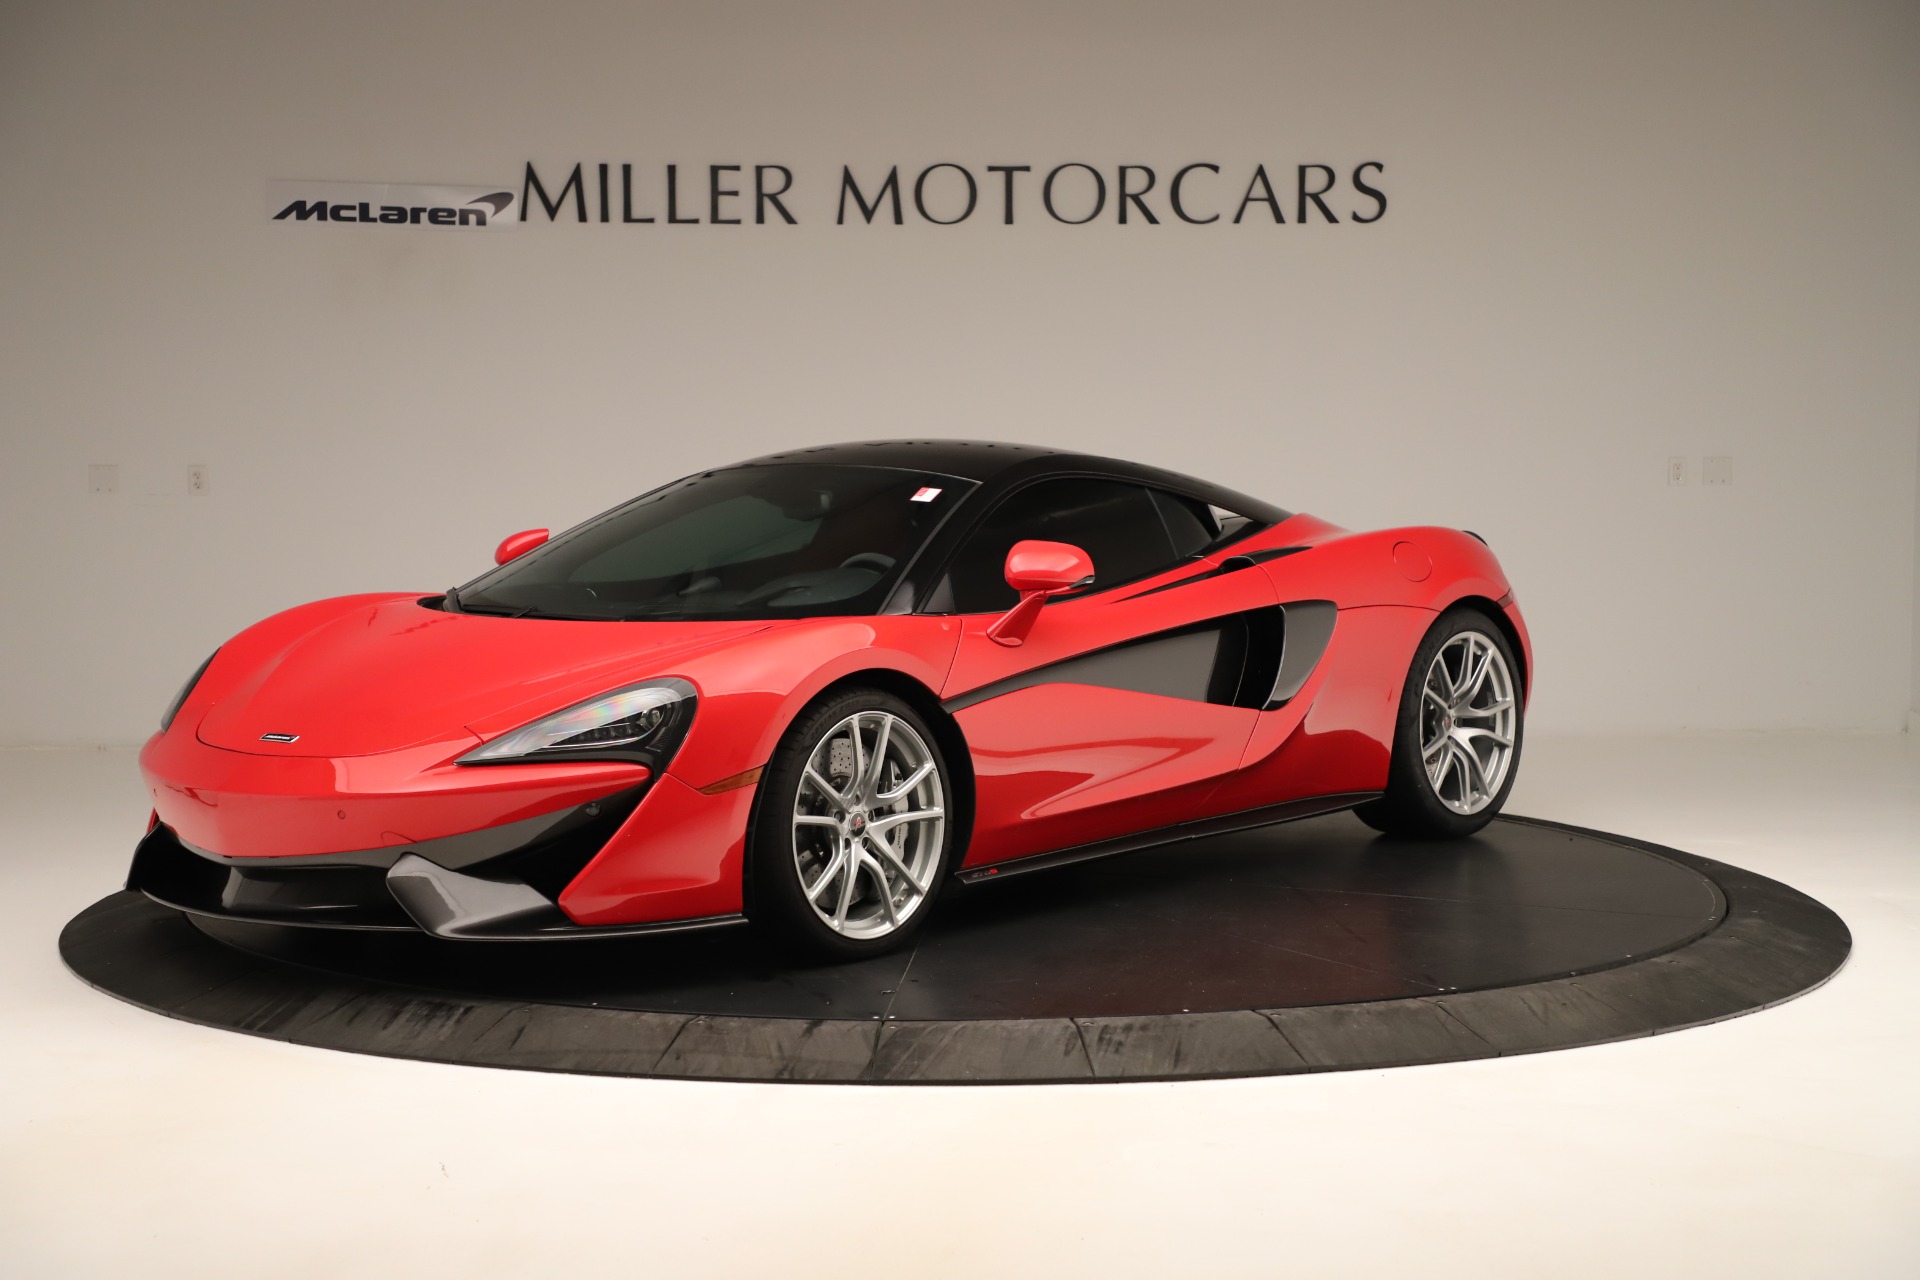 Used 2016 McLaren 570S Coupe for sale Sold at Pagani of Greenwich in Greenwich CT 06830 1